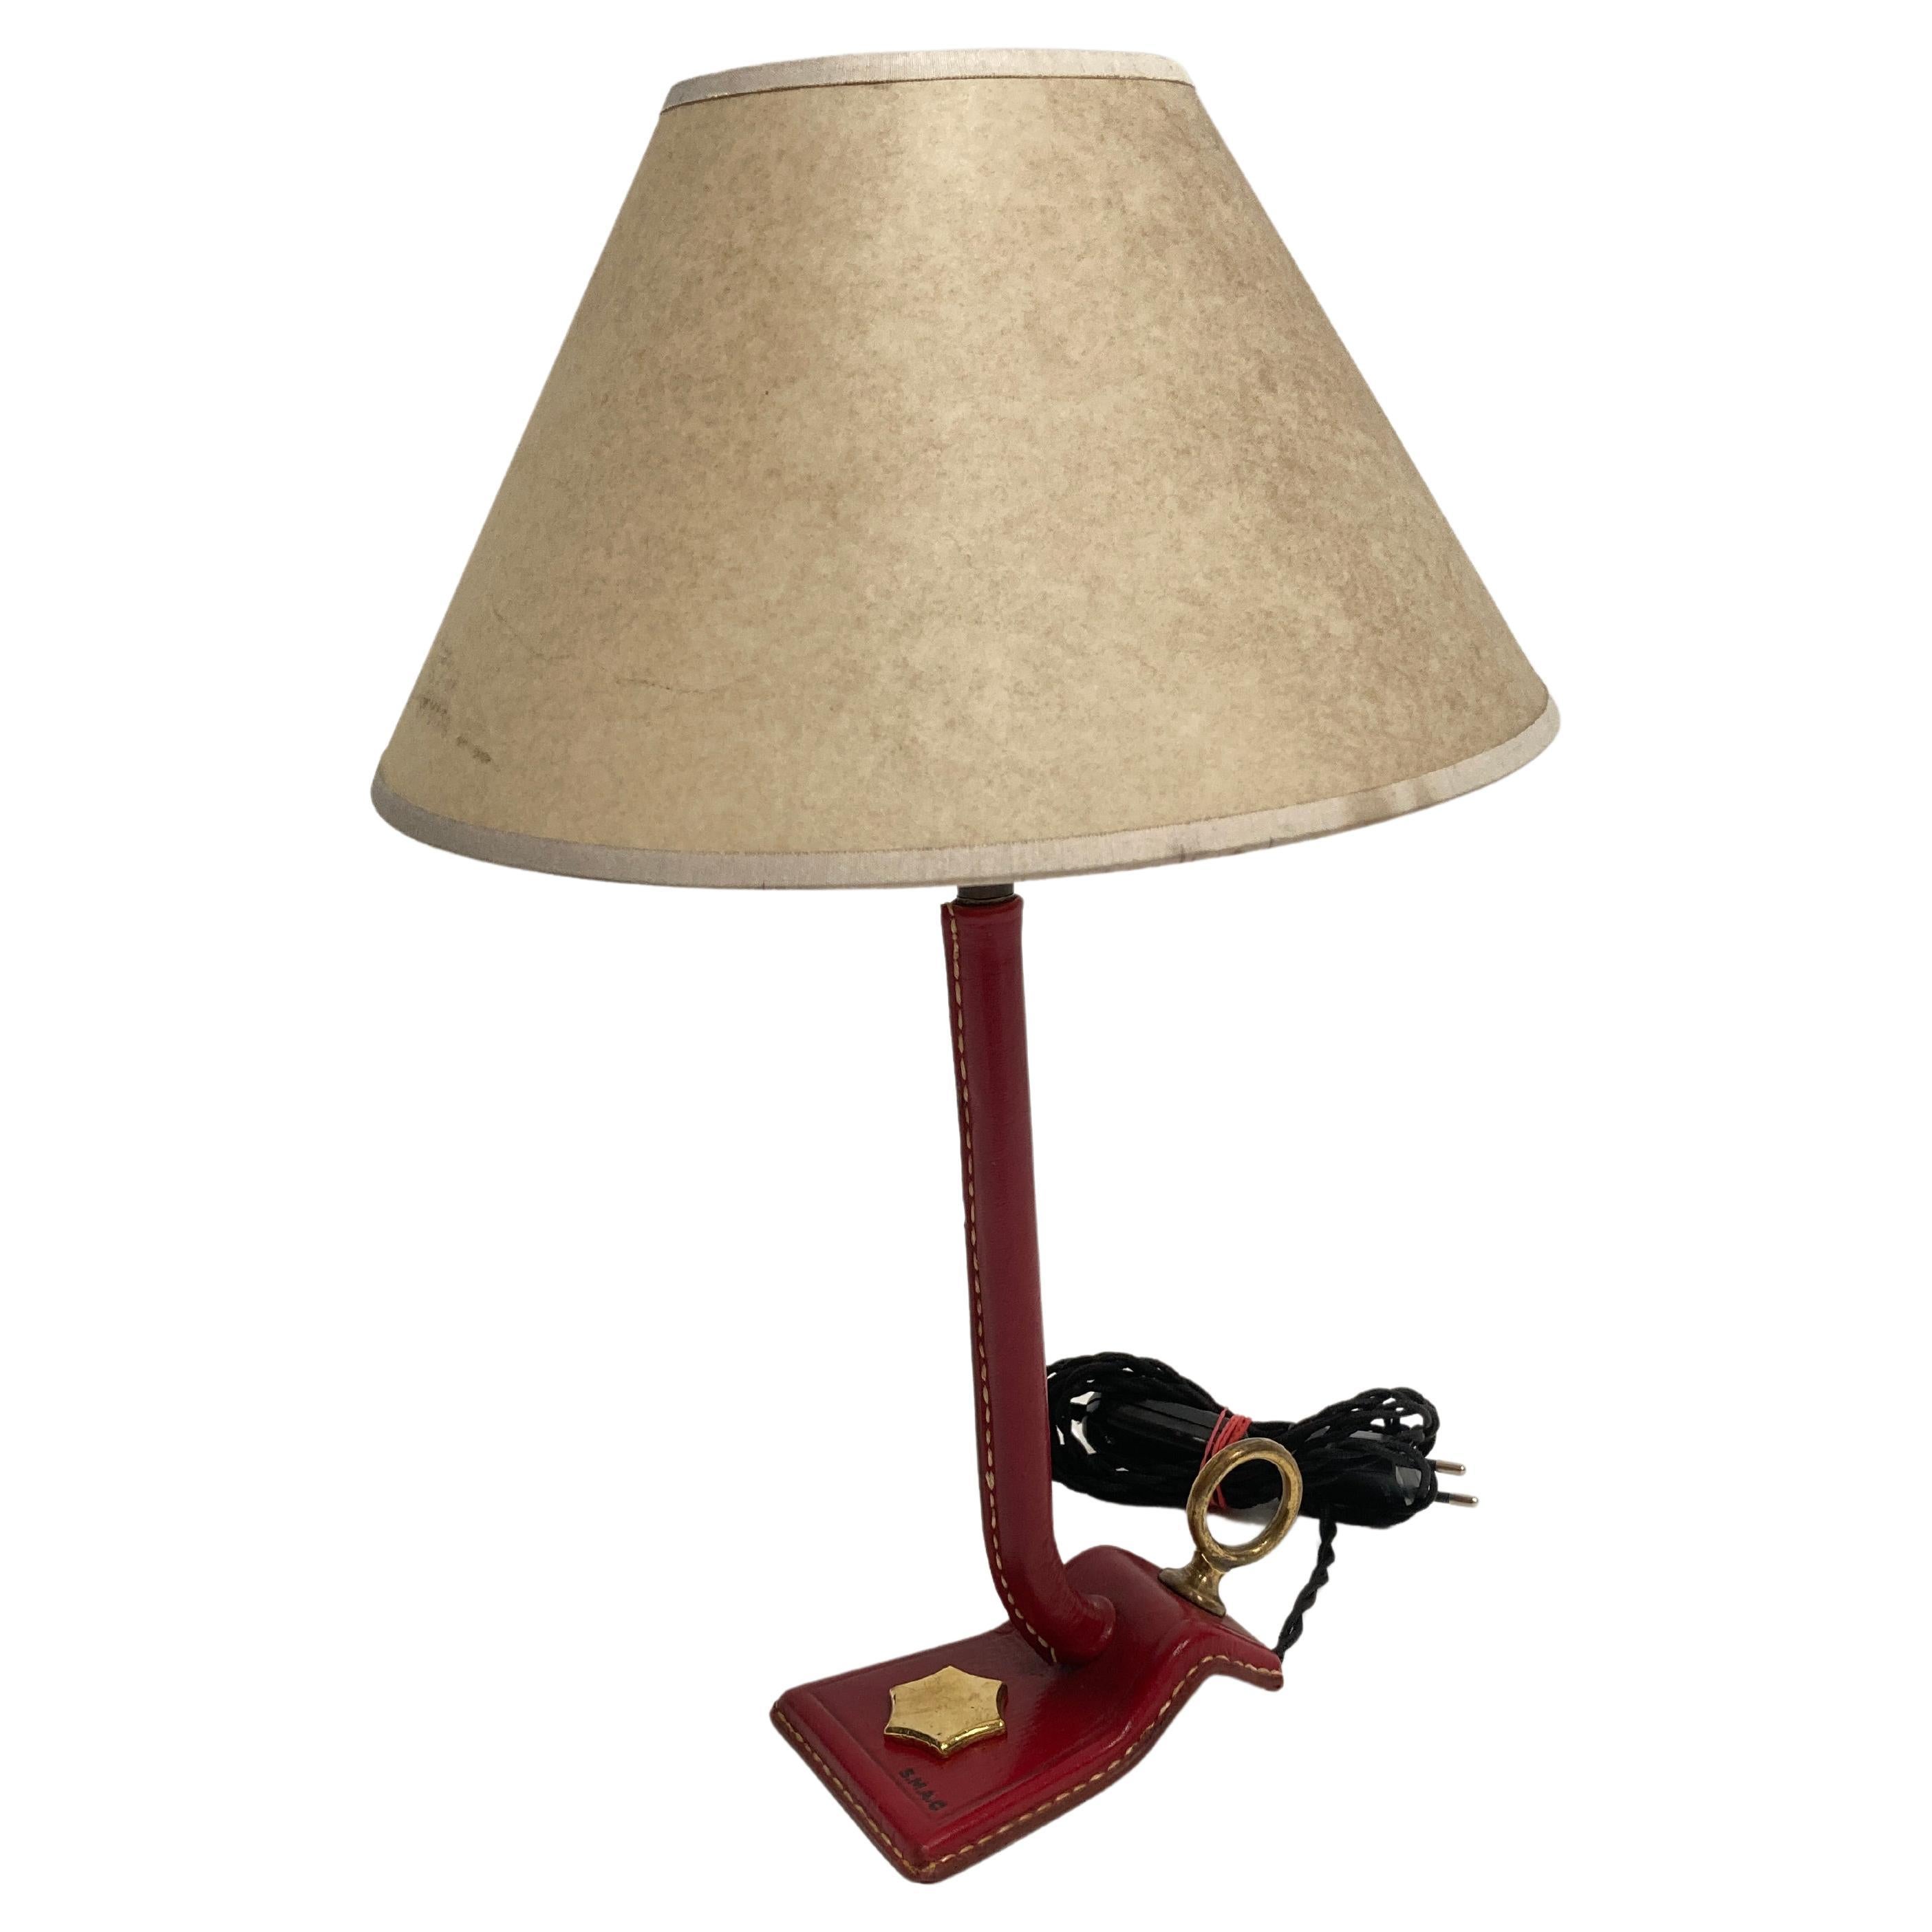 1950's Stitched leather table lamp by Jacques Adnet For Sale